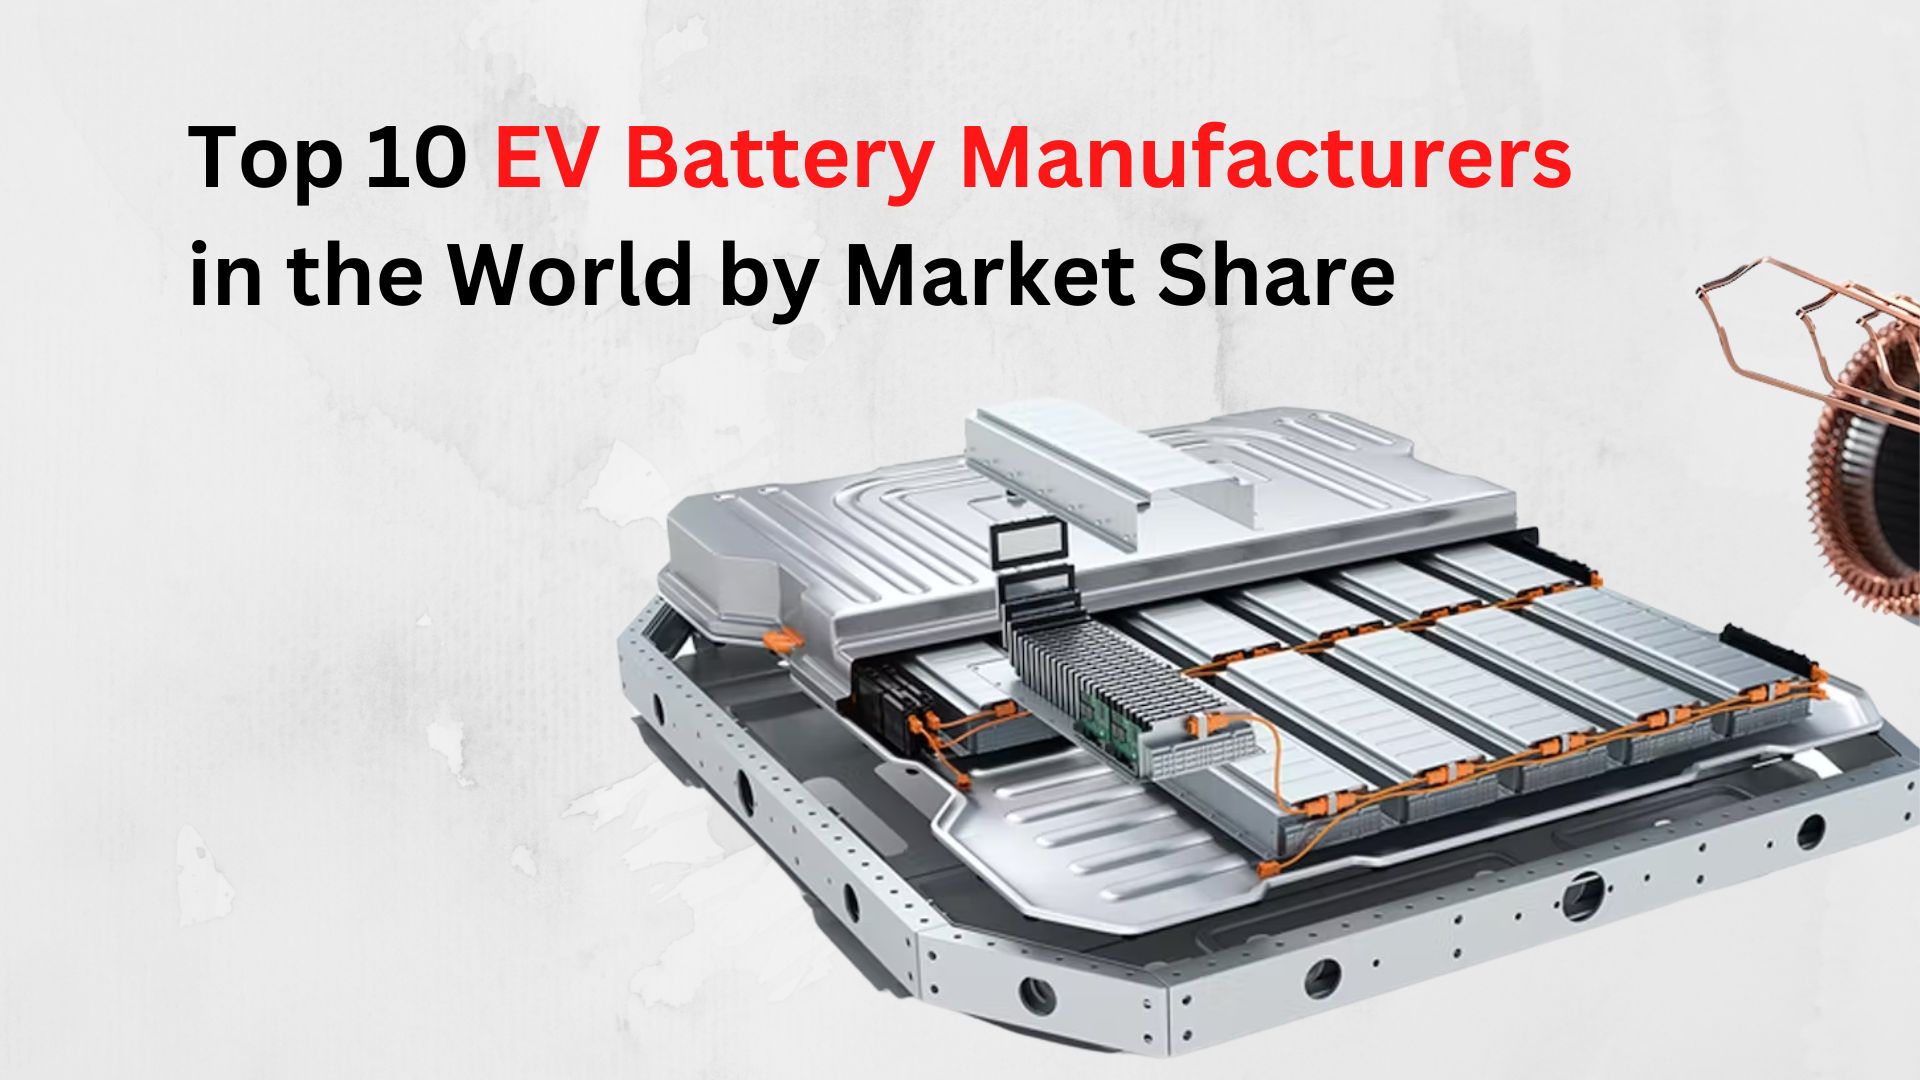 https://e-vehicleinfo.com/global/ev-battery-manufacturers-in-world-by-market-share/